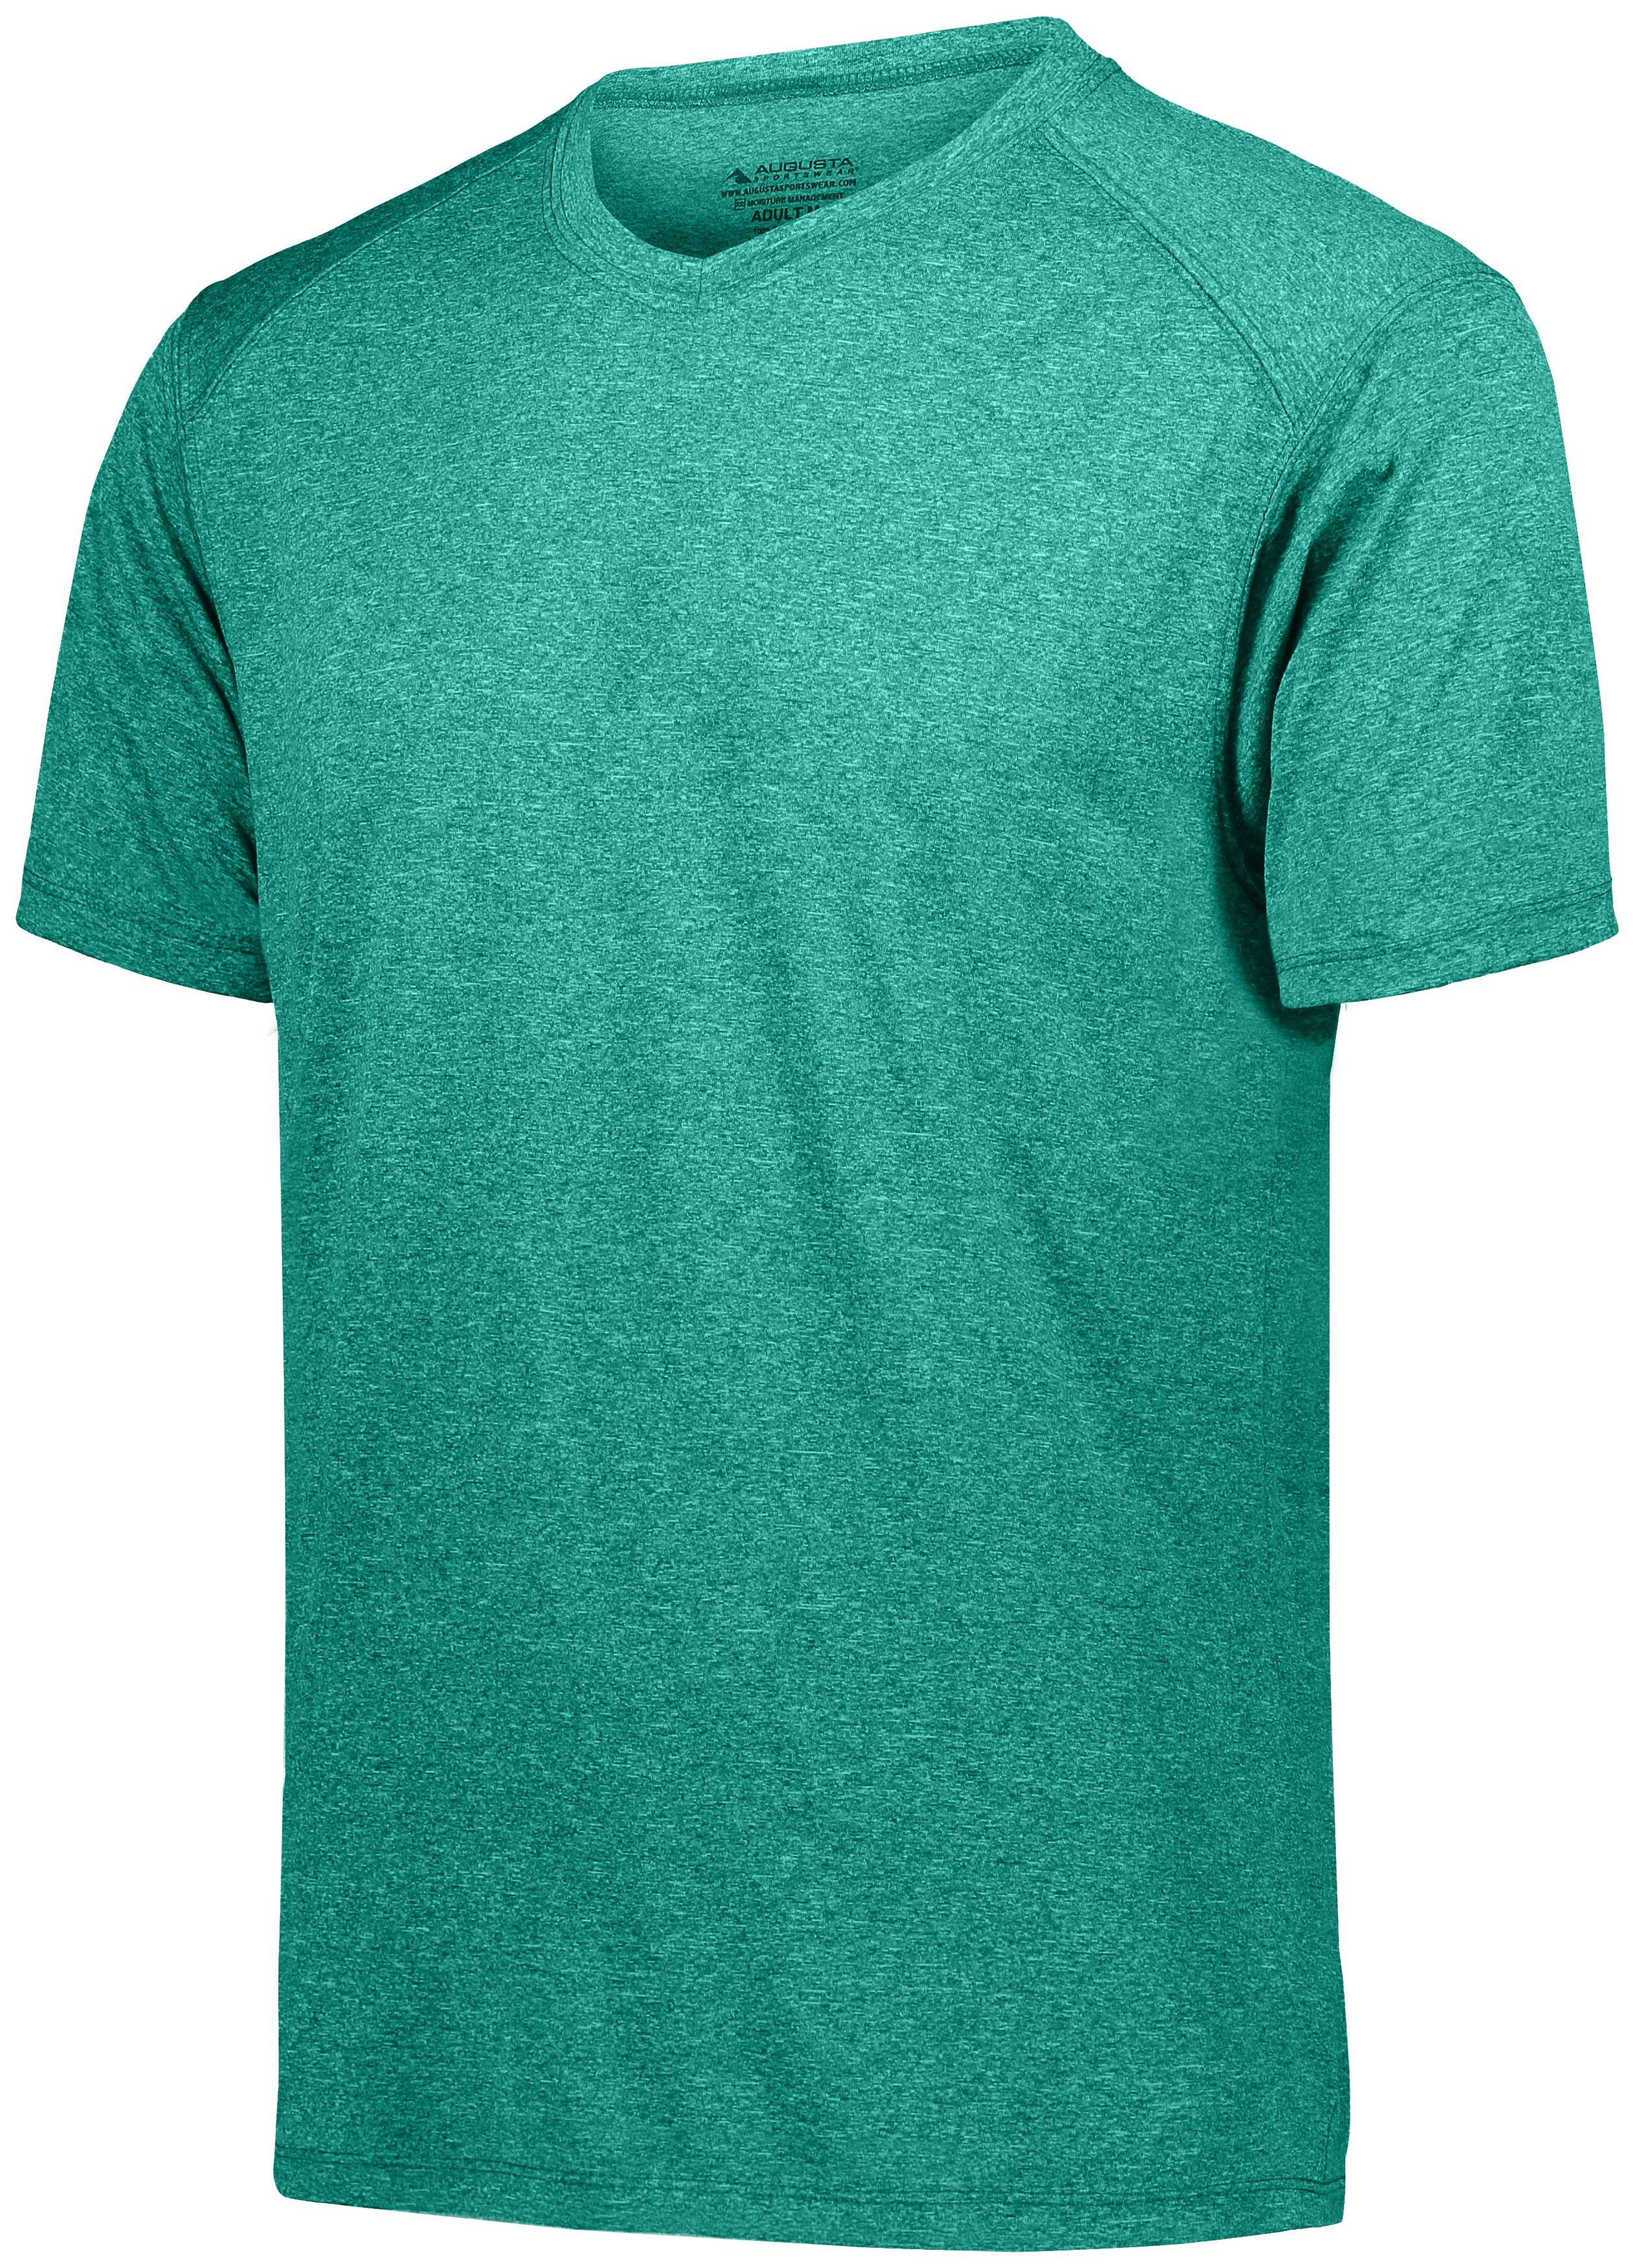 Augusta Sportswear Youth Kinergy Training Tee in Dark Green Heather  -Part of the Youth, Youth-Tee-Shirt, T-Shirts, Augusta-Products, Shirts product lines at KanaleyCreations.com